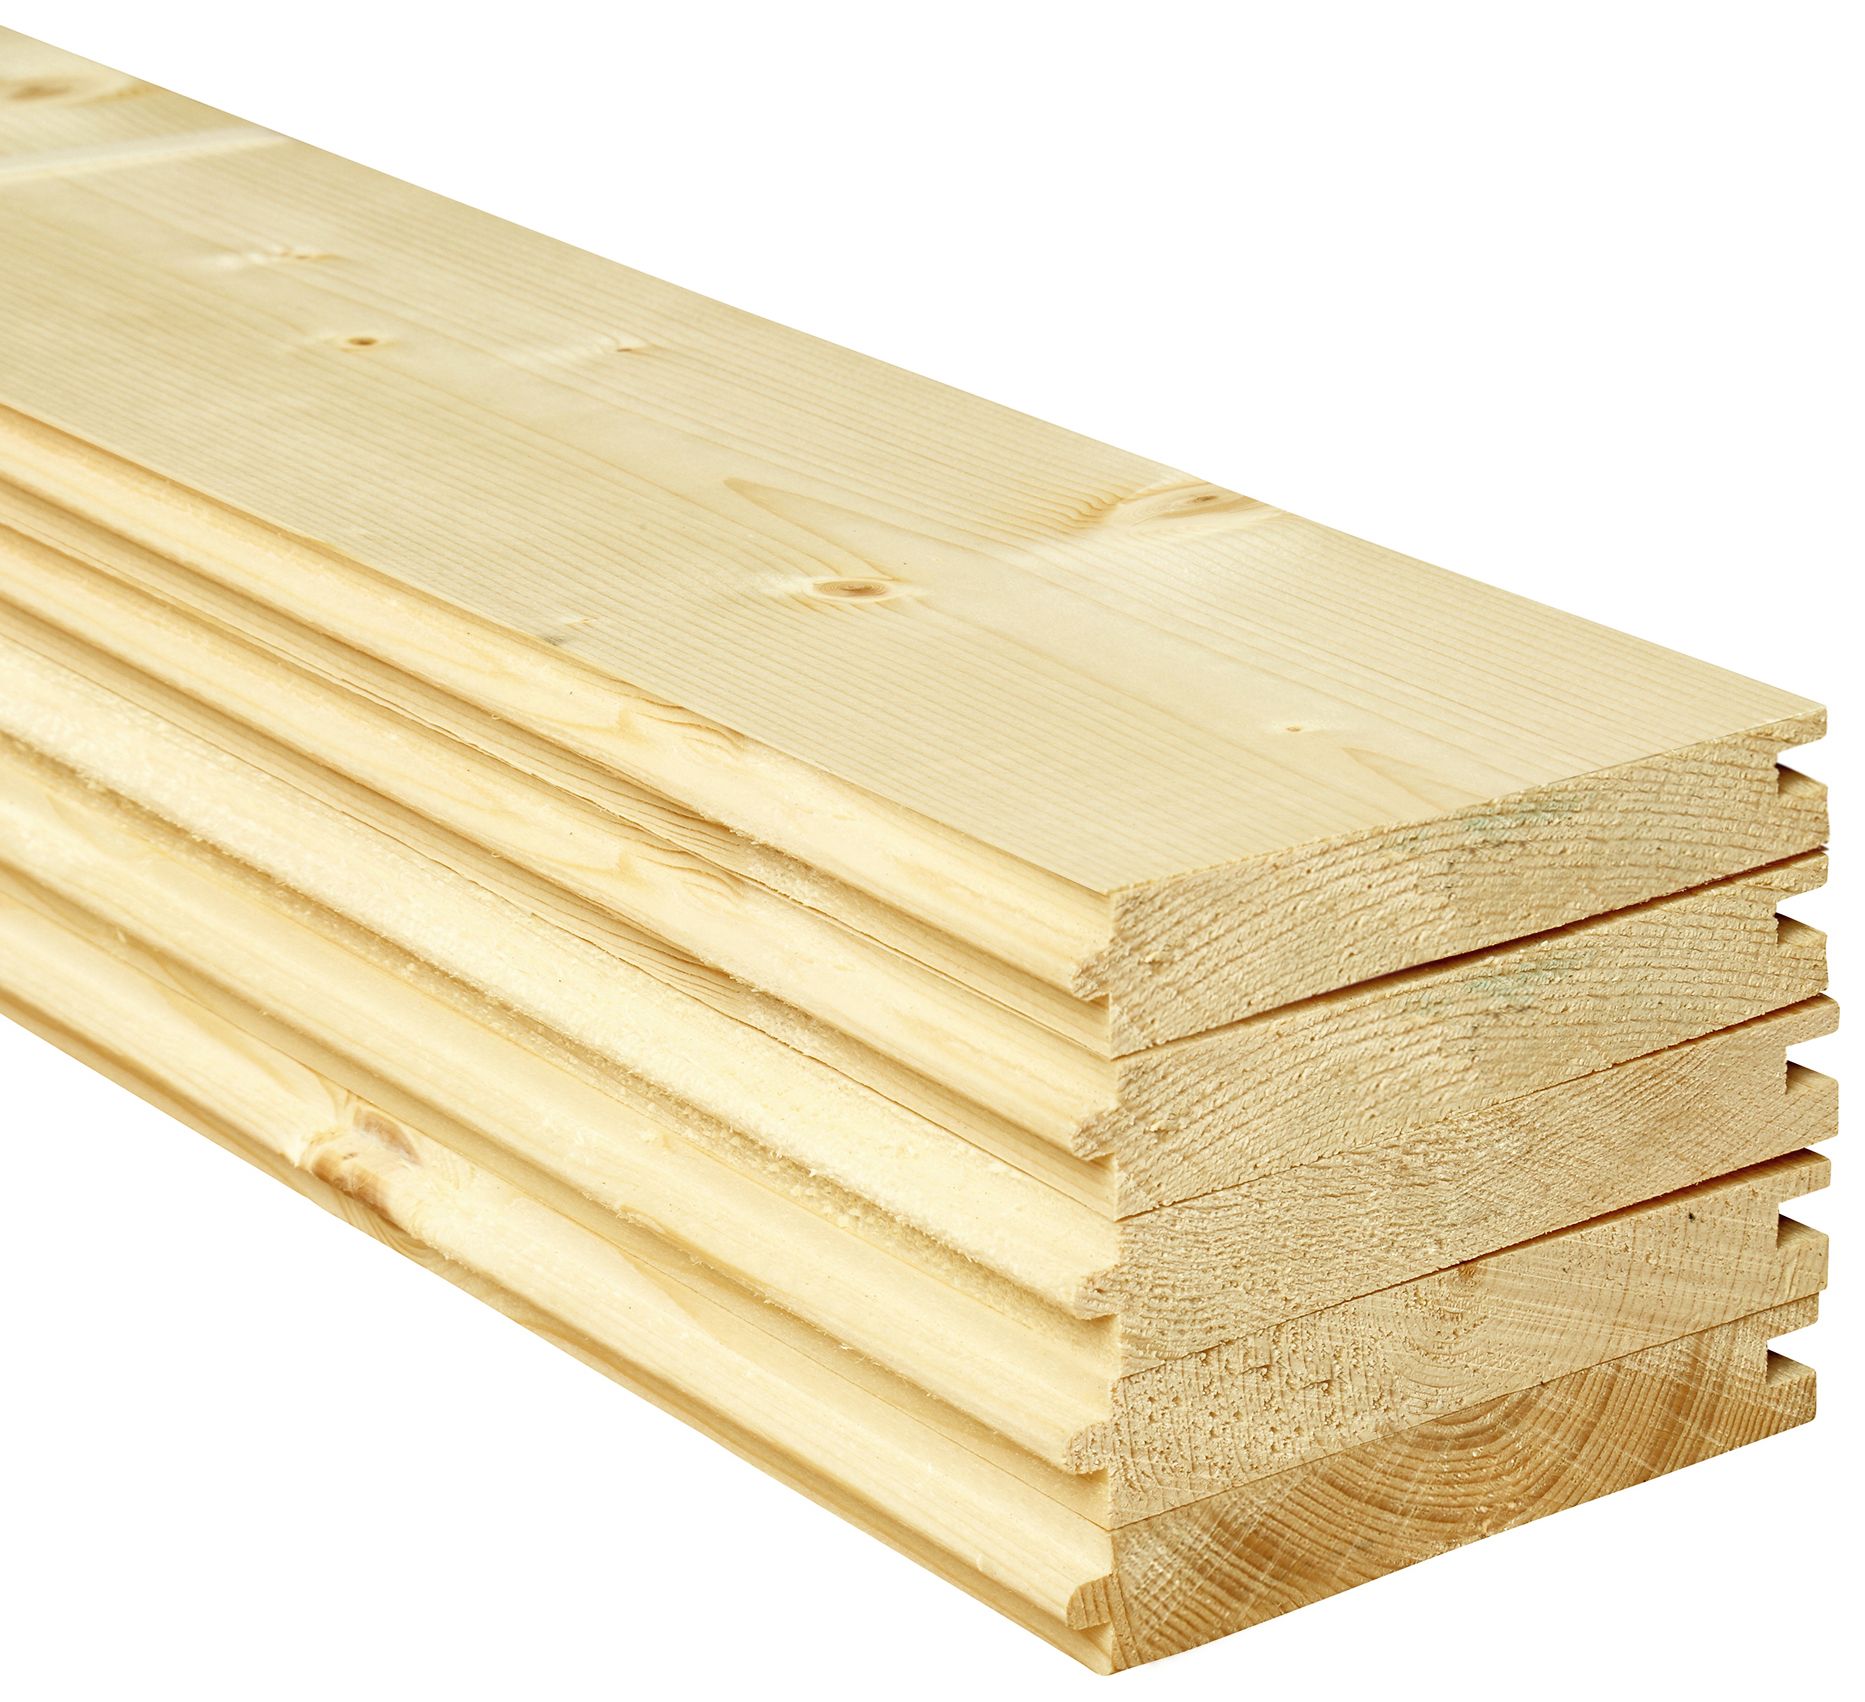 Image of PTG Floorboards - 18mm x 144mm x 3000mm - Pack of 5